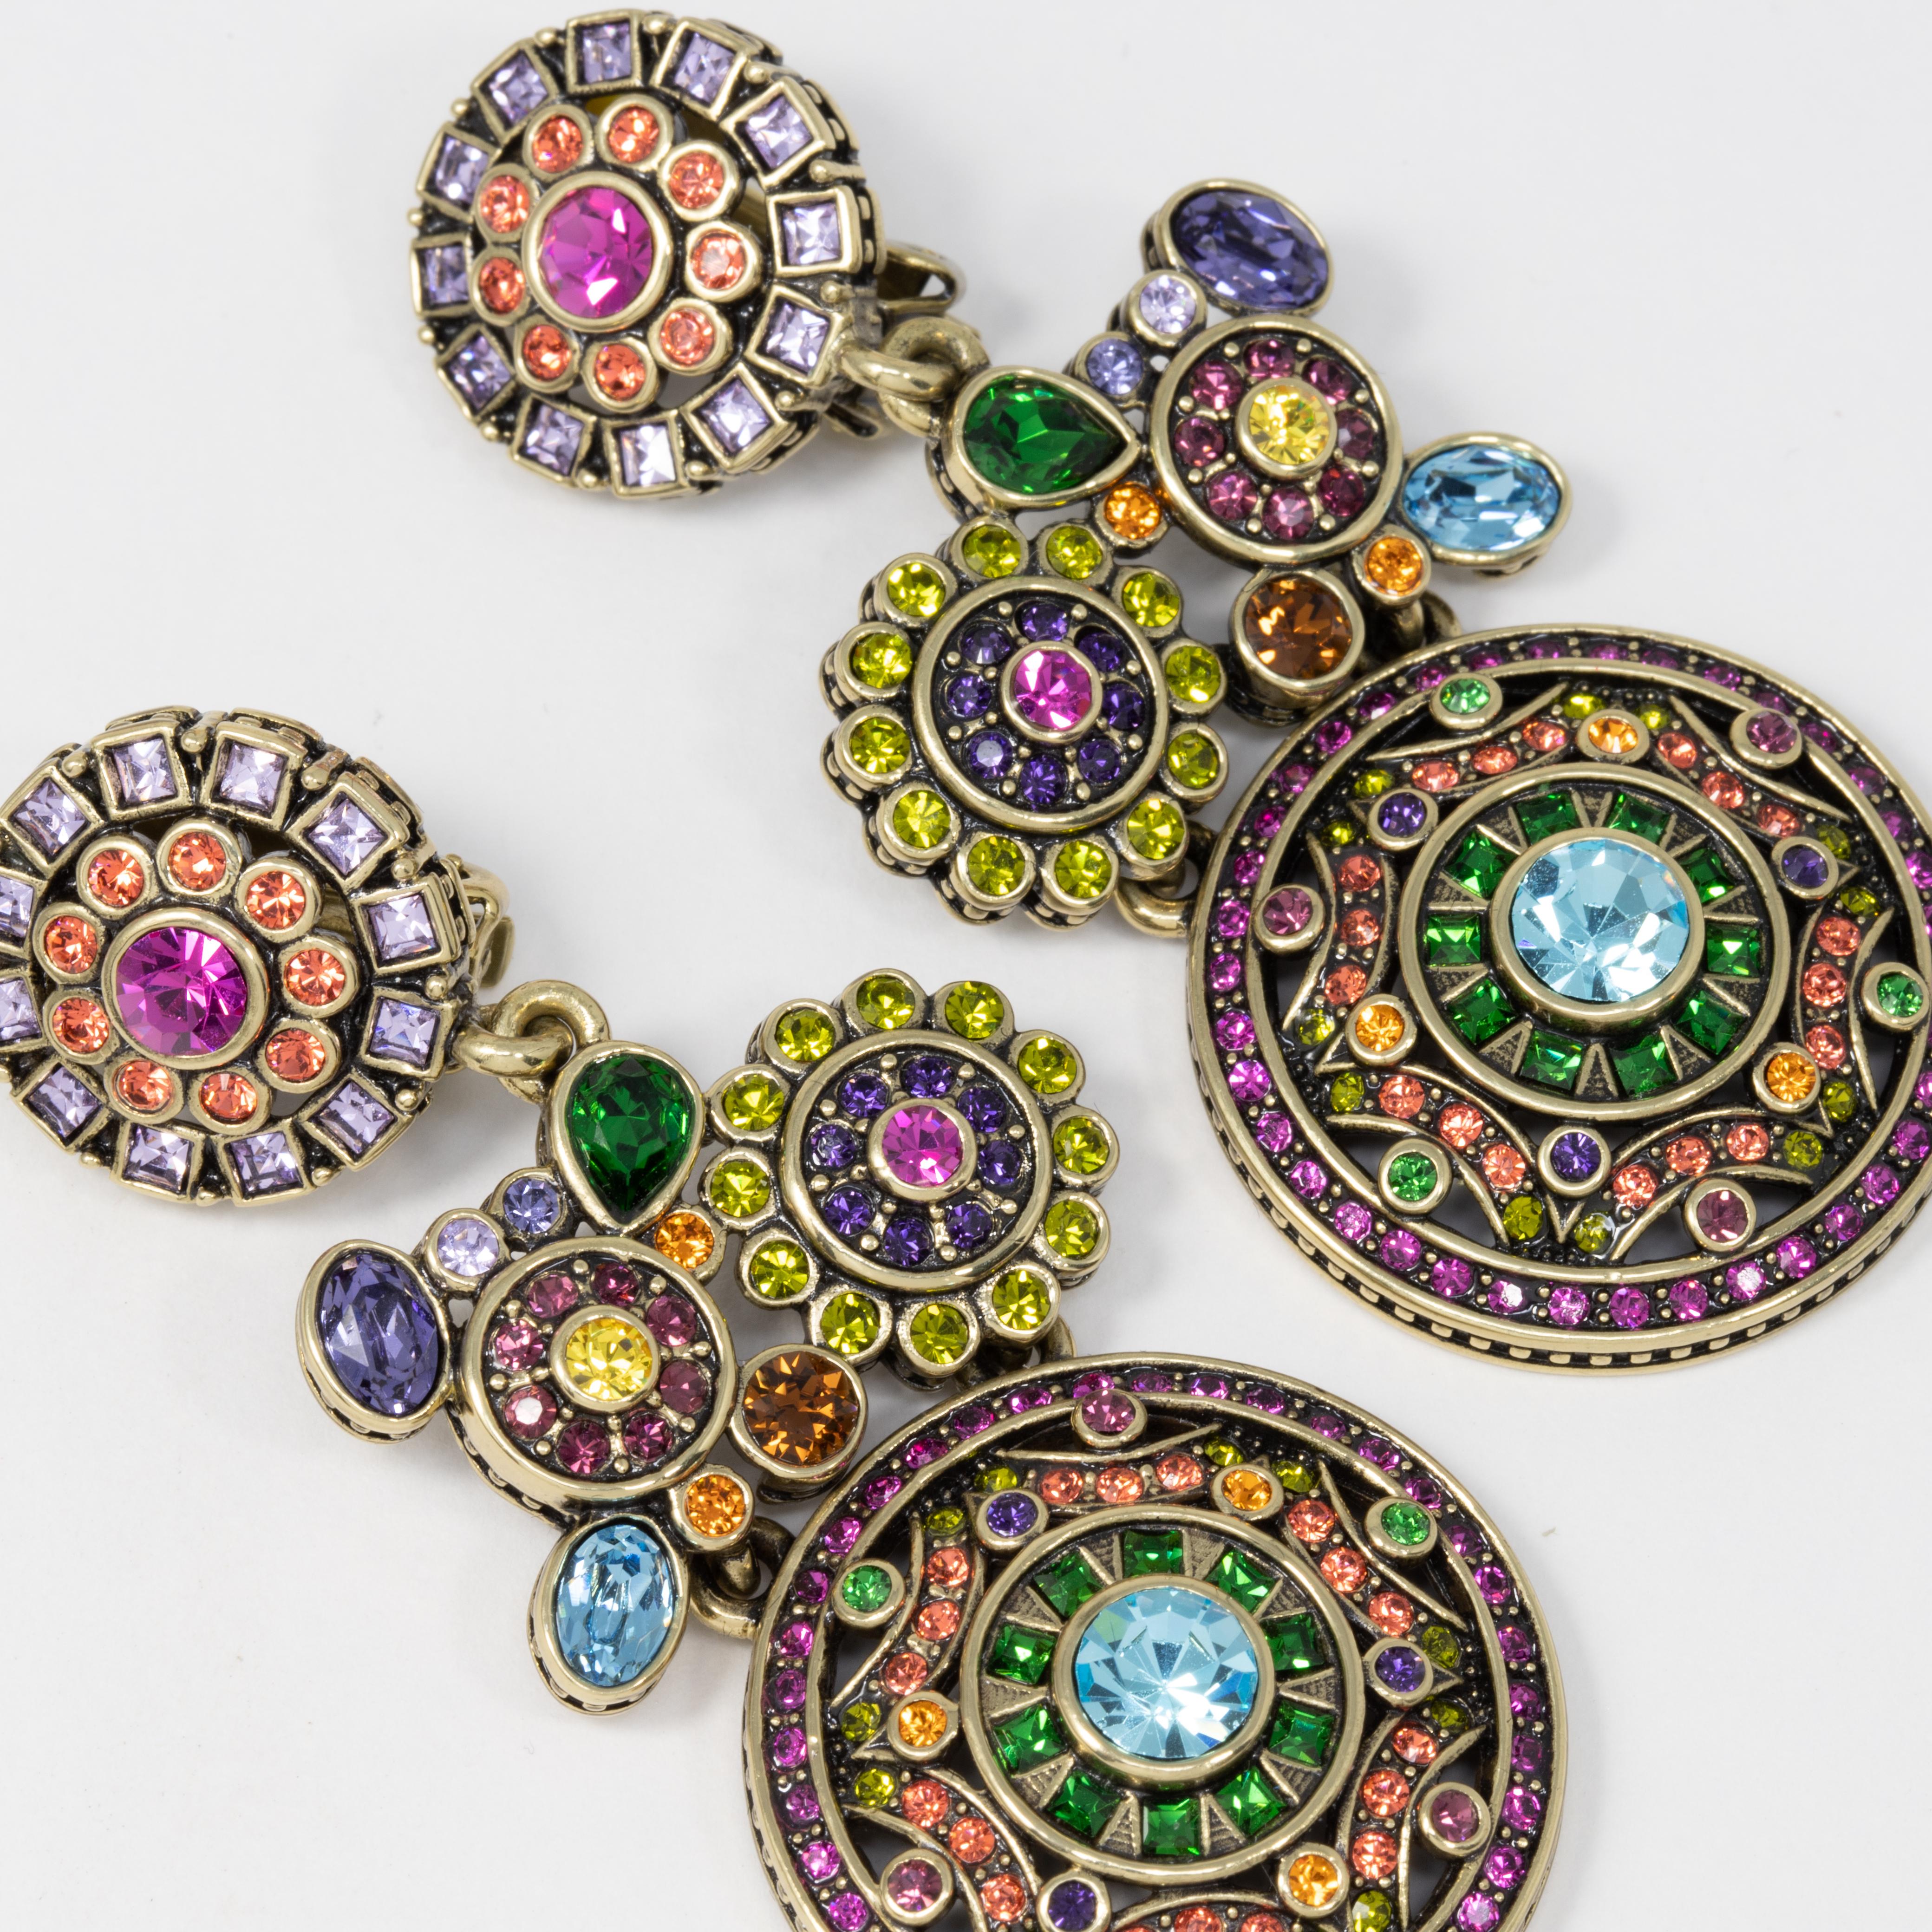 Heidi Daus ornate dangling clip on earrings. Each features large round flower and abstract motifs adorned with colorful crystals.

Hallmarks: Heidi Daus, China

